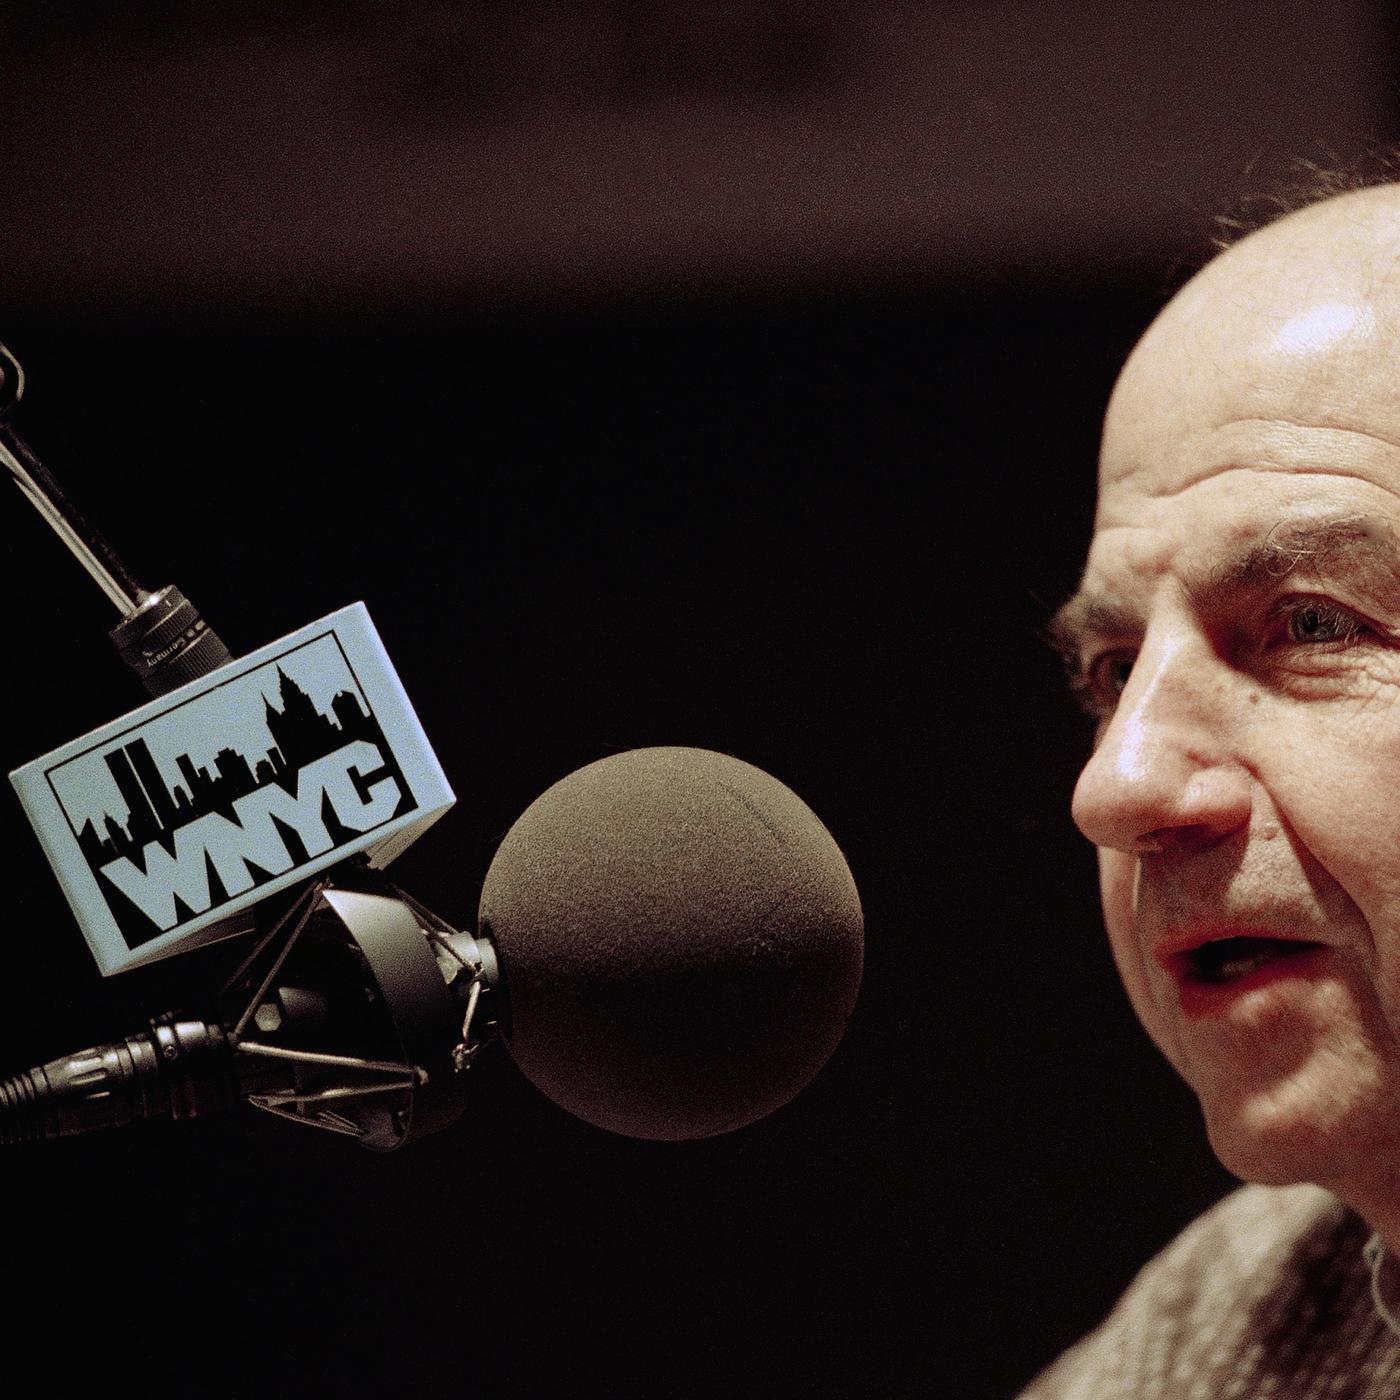 A Journalism History Lesson from Calvin Trillin